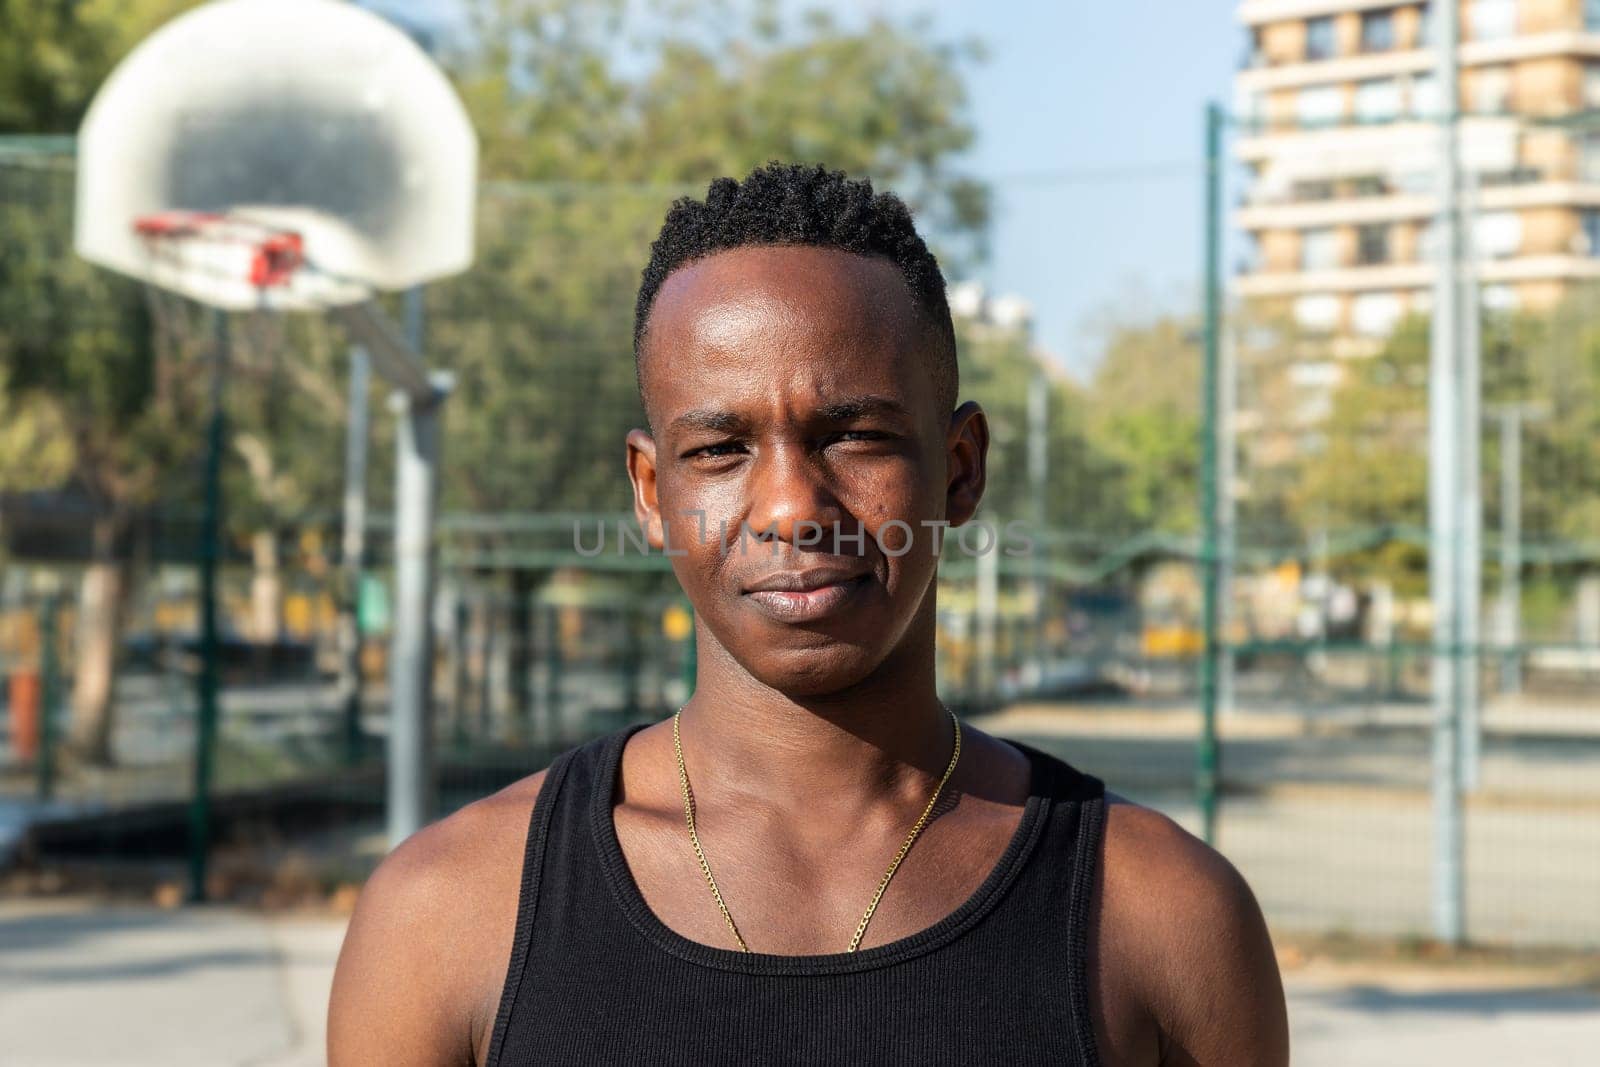 Headshot portrait of black young man in basketball court outdoors looking at camera. by Hoverstock